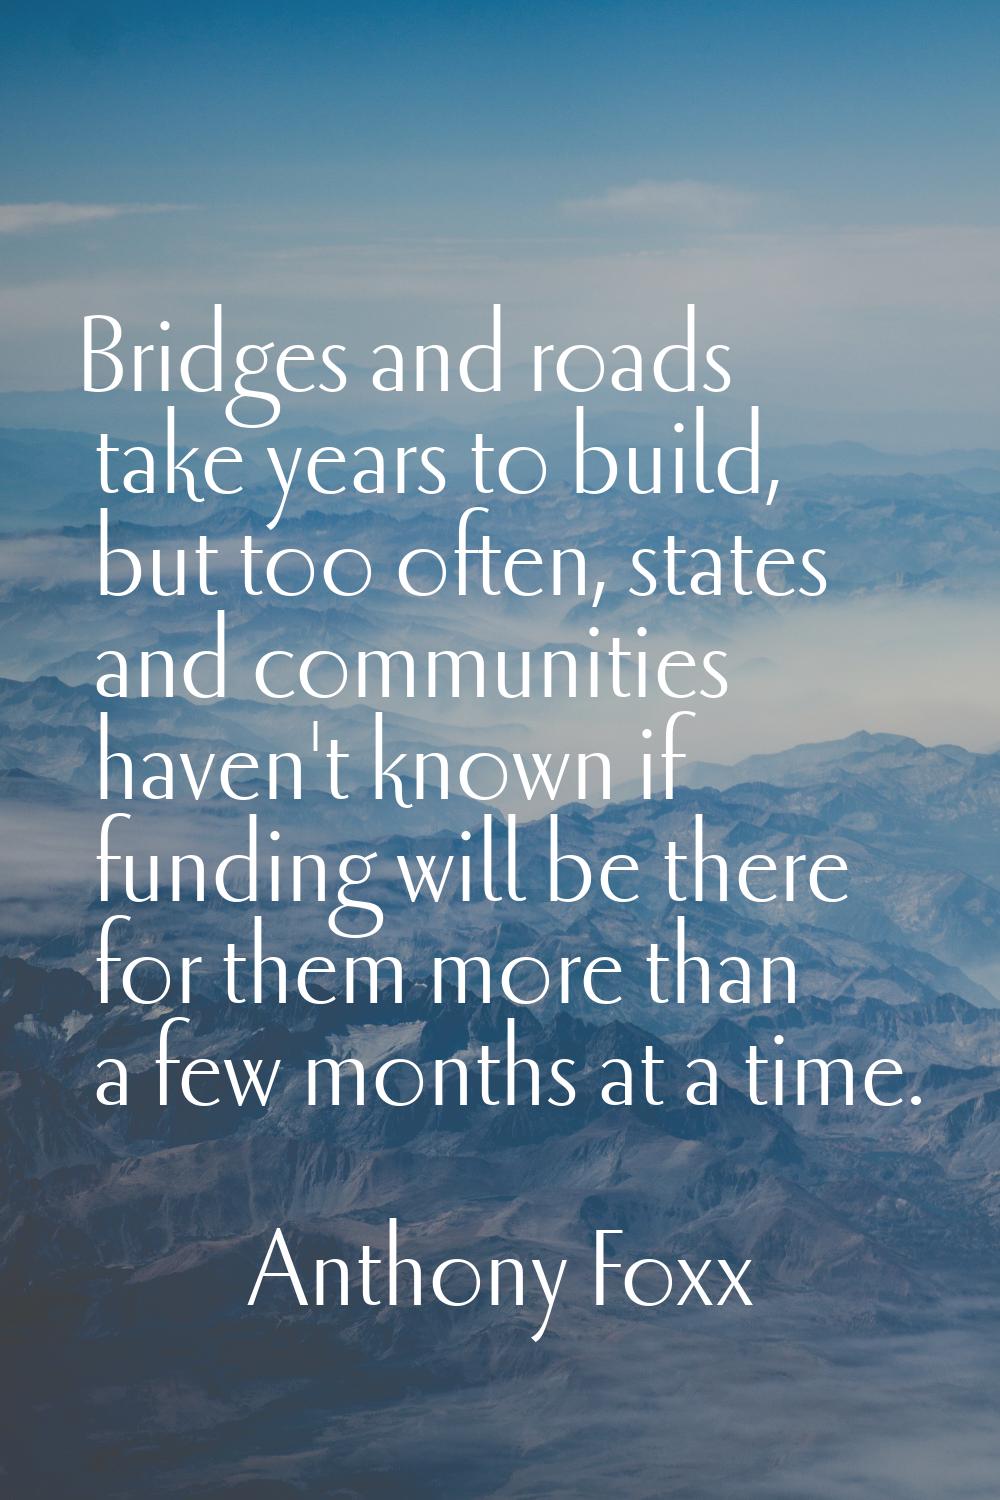 Bridges and roads take years to build, but too often, states and communities haven't known if fundi